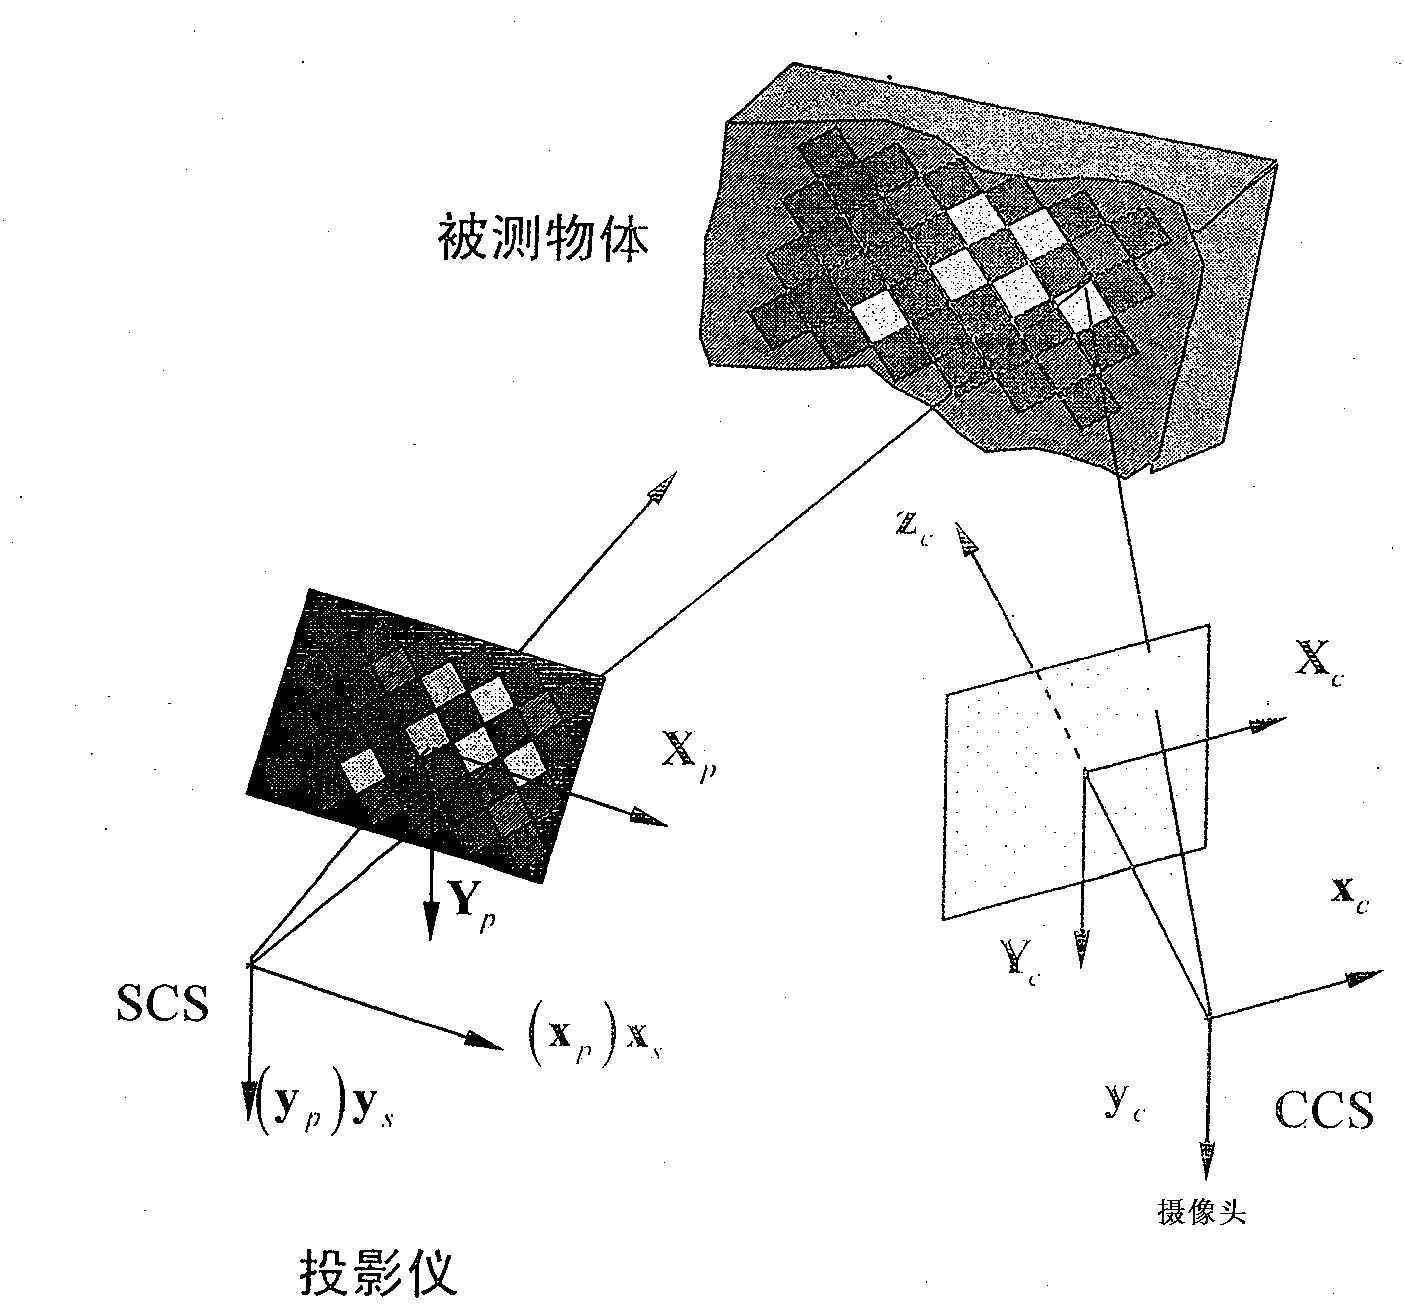 Active three-dimensional omnidirectional vision-based river width measuring device